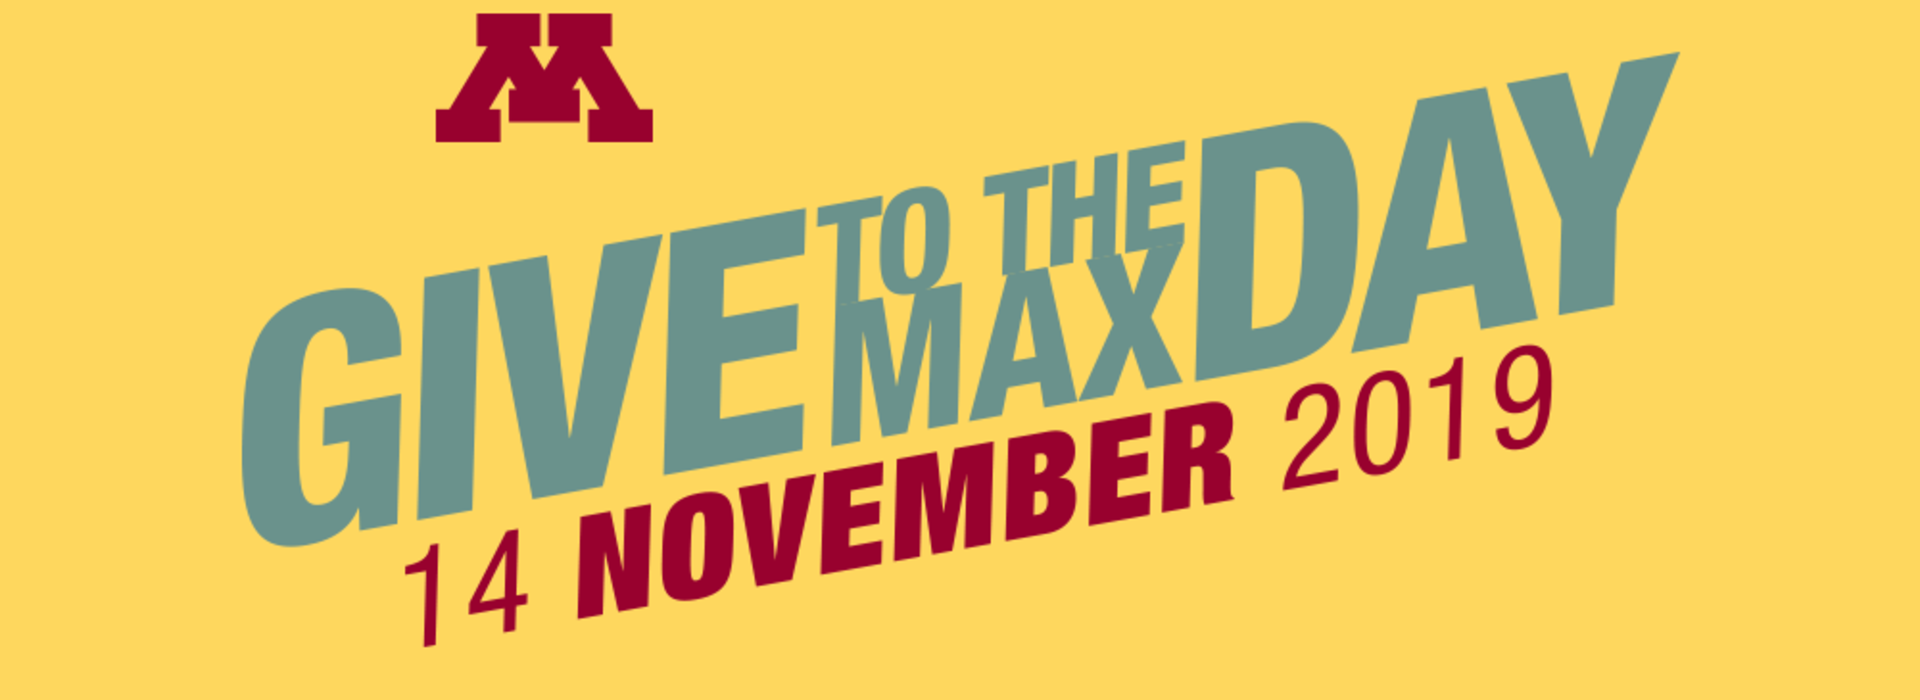 Give to the Max Day Graphic